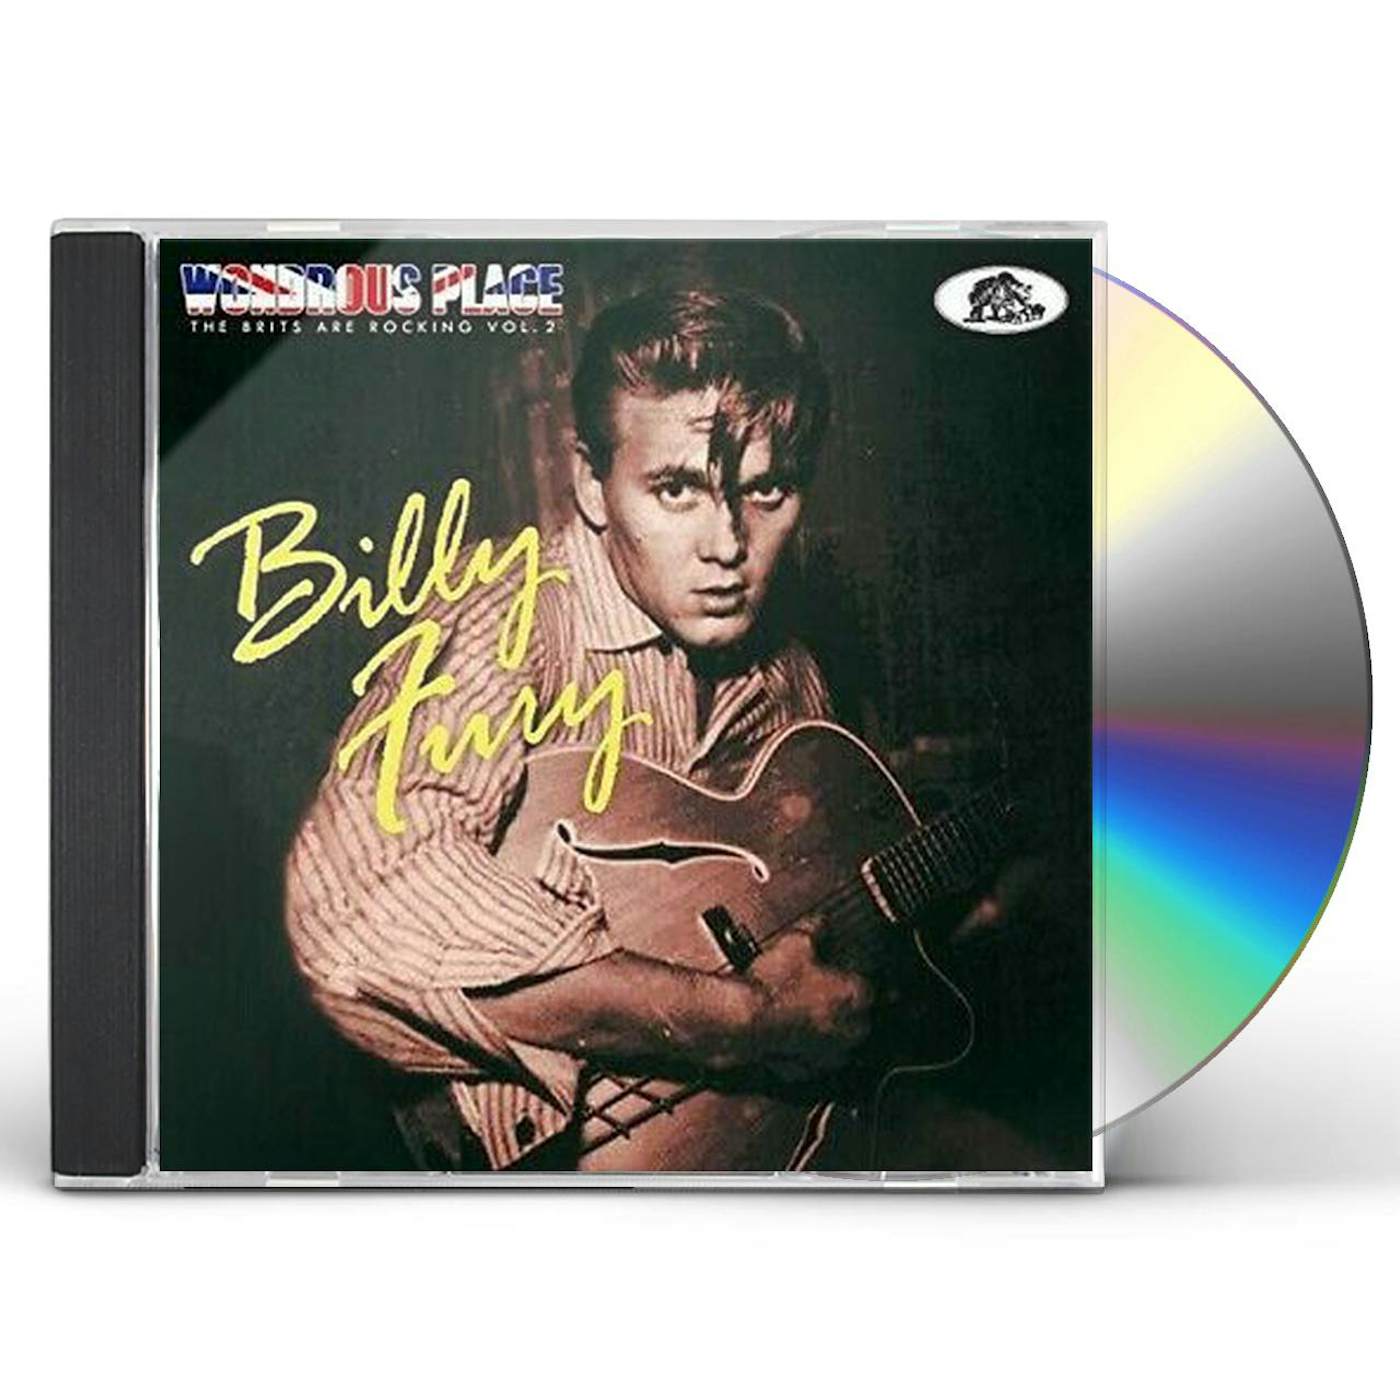 Billy Fury WONDROUS PLACE: THE BRITS ARE ROCKING 2 CD